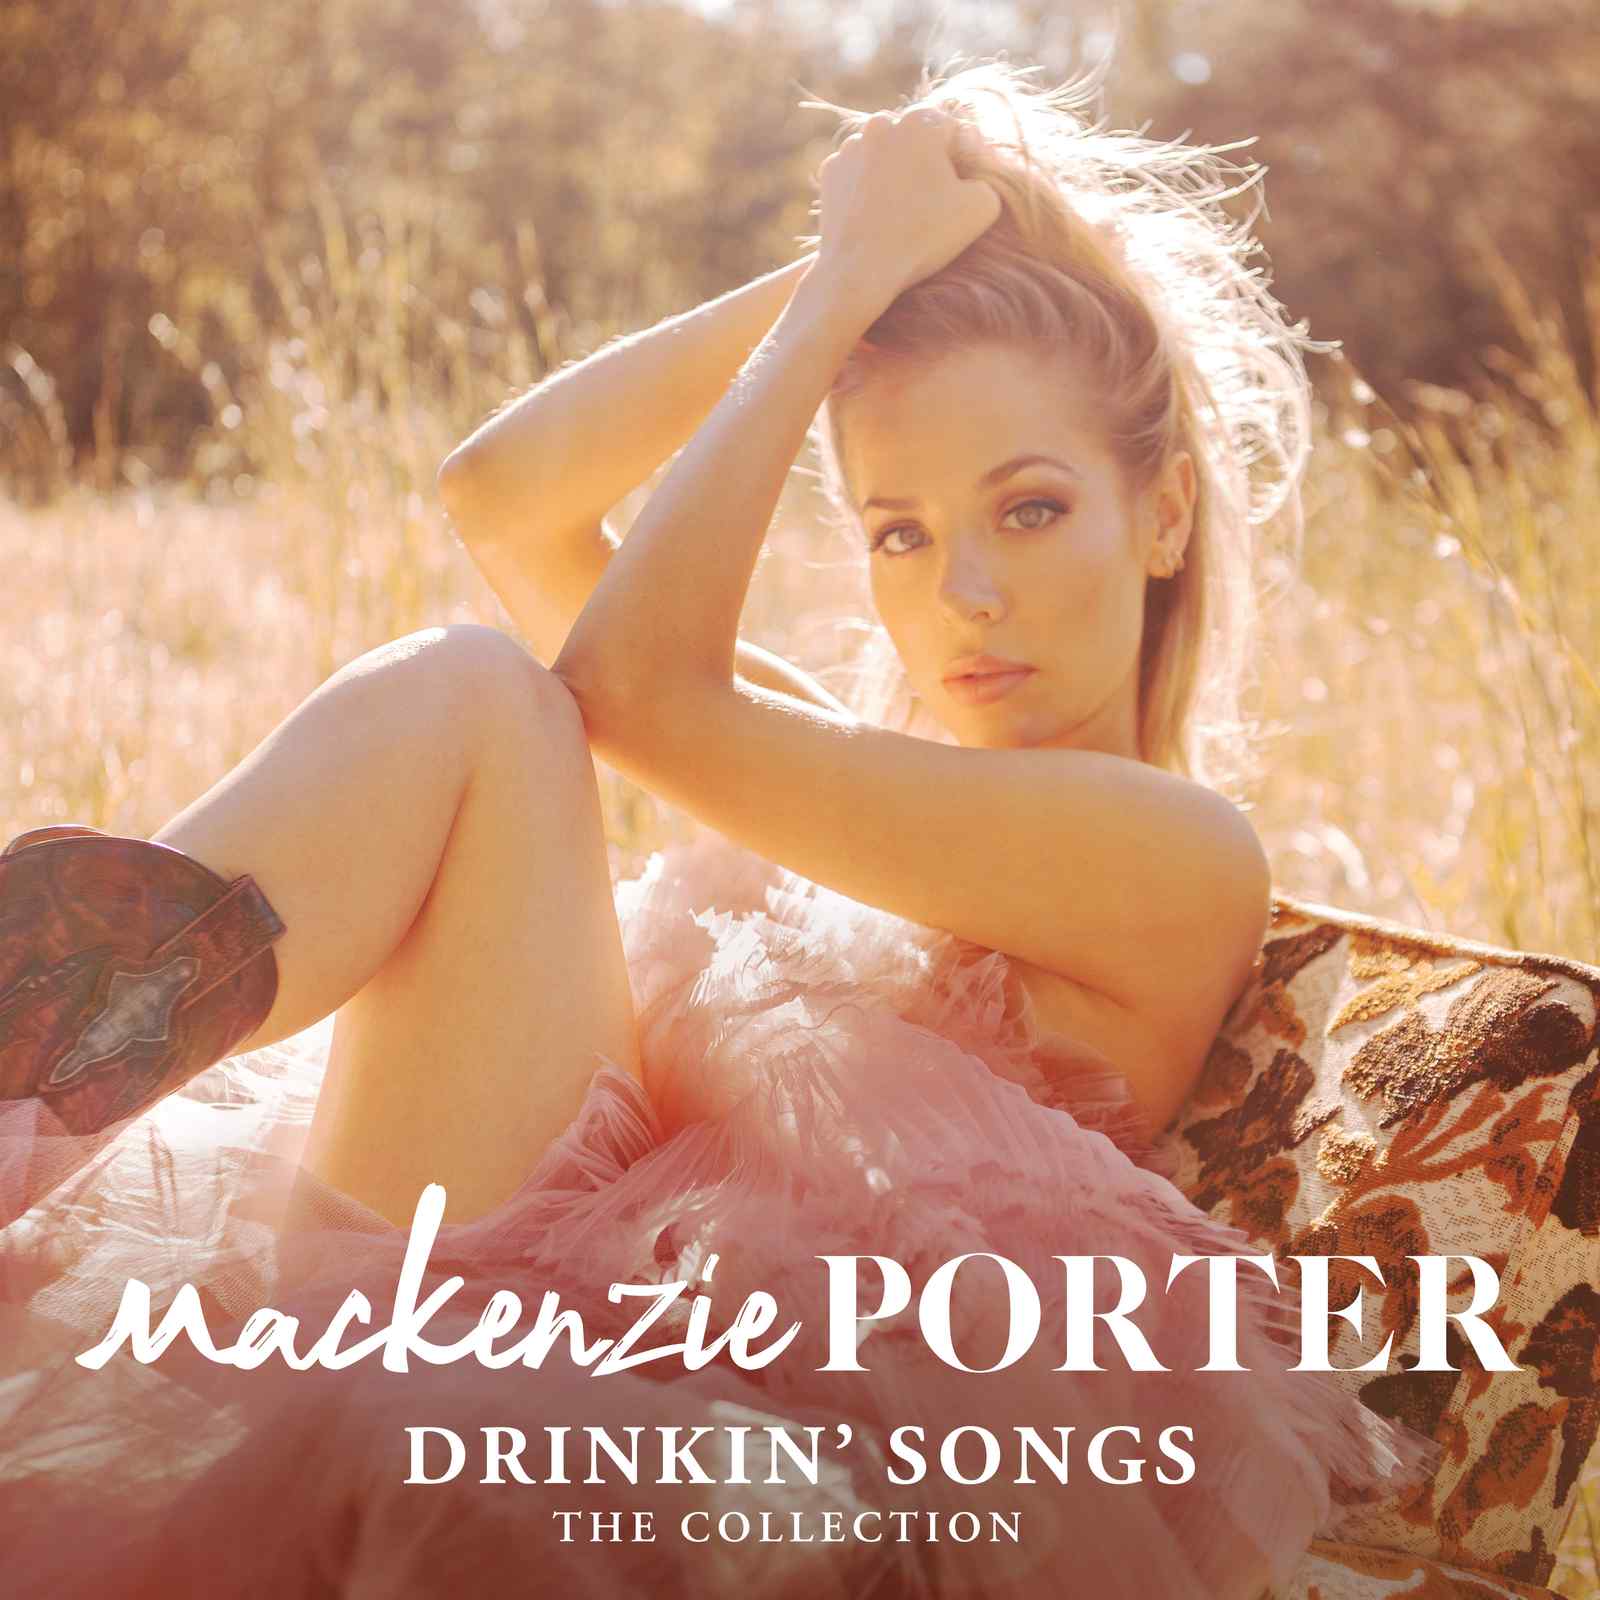 Drinkin' Songs: The Collection by MacKenzie Porter